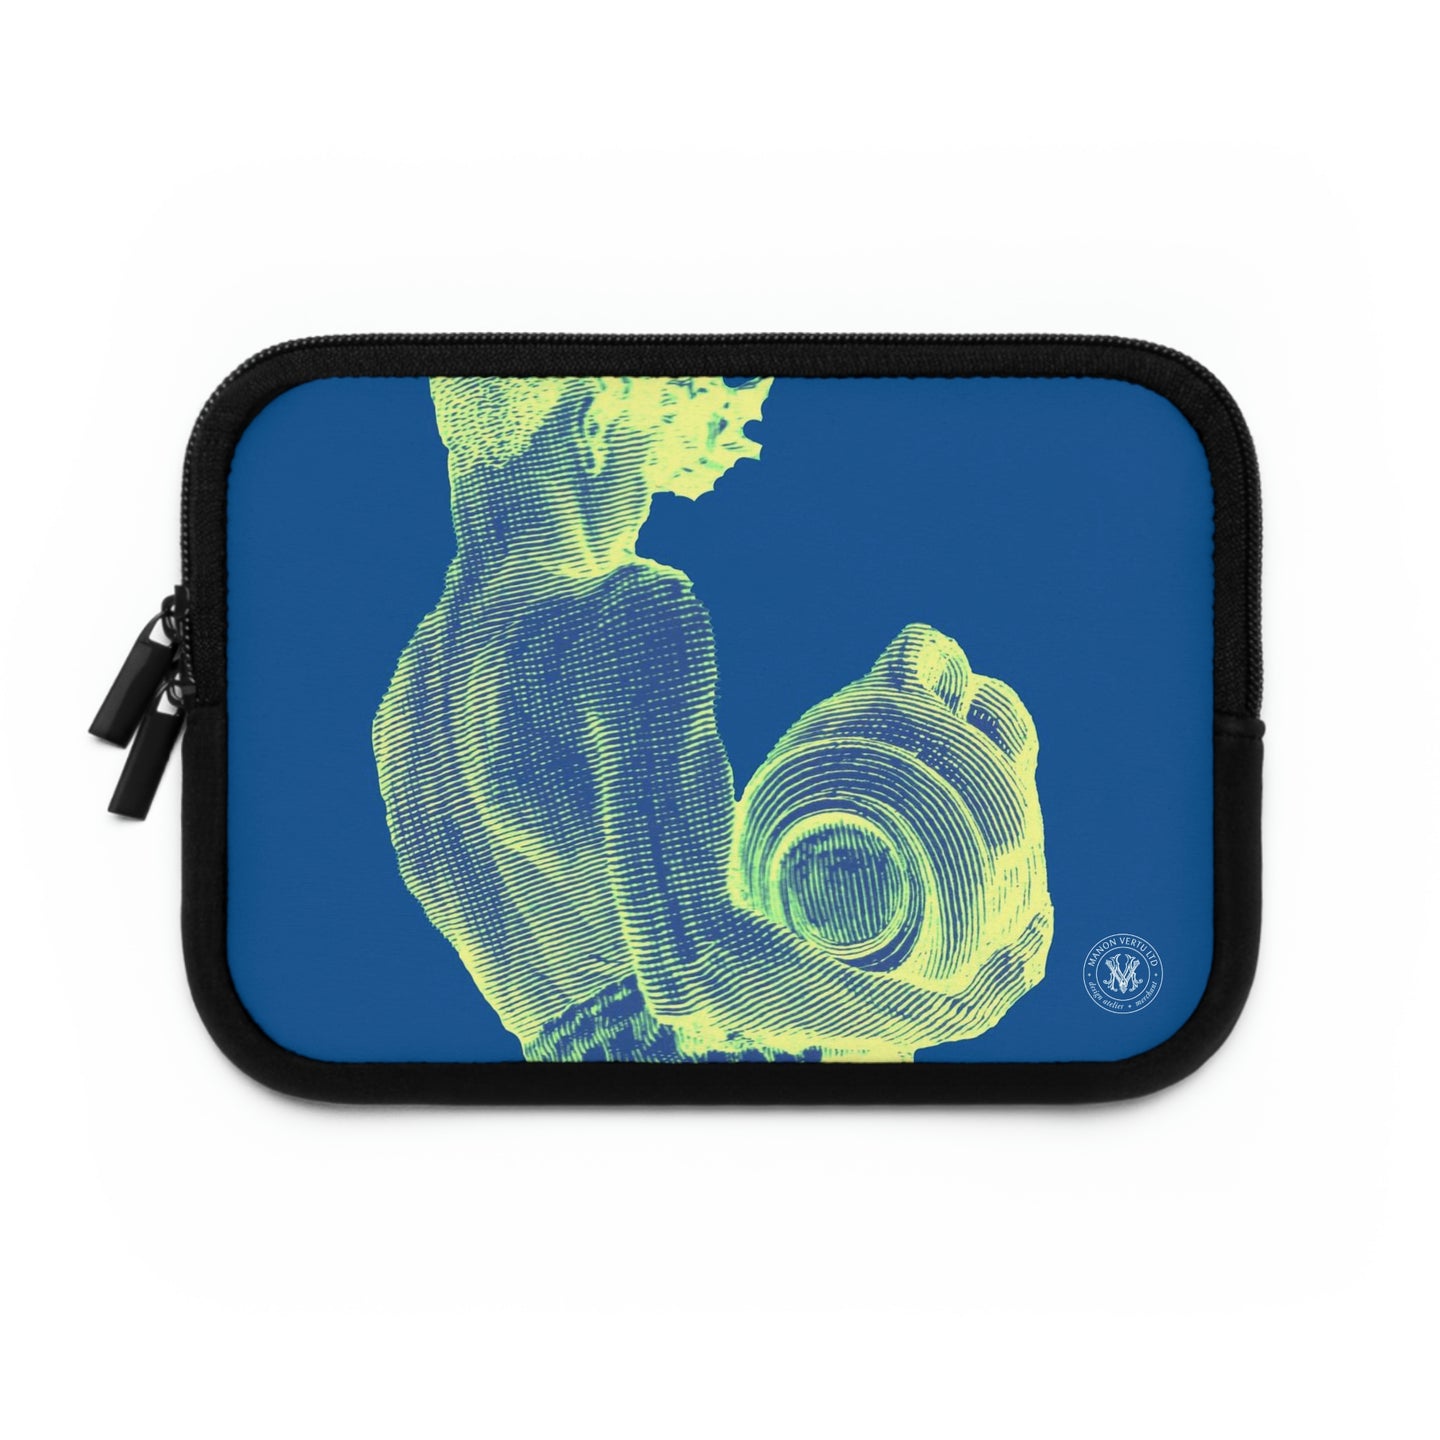 Aquarius: The Stars Within Laptop & Tablet Sleeve